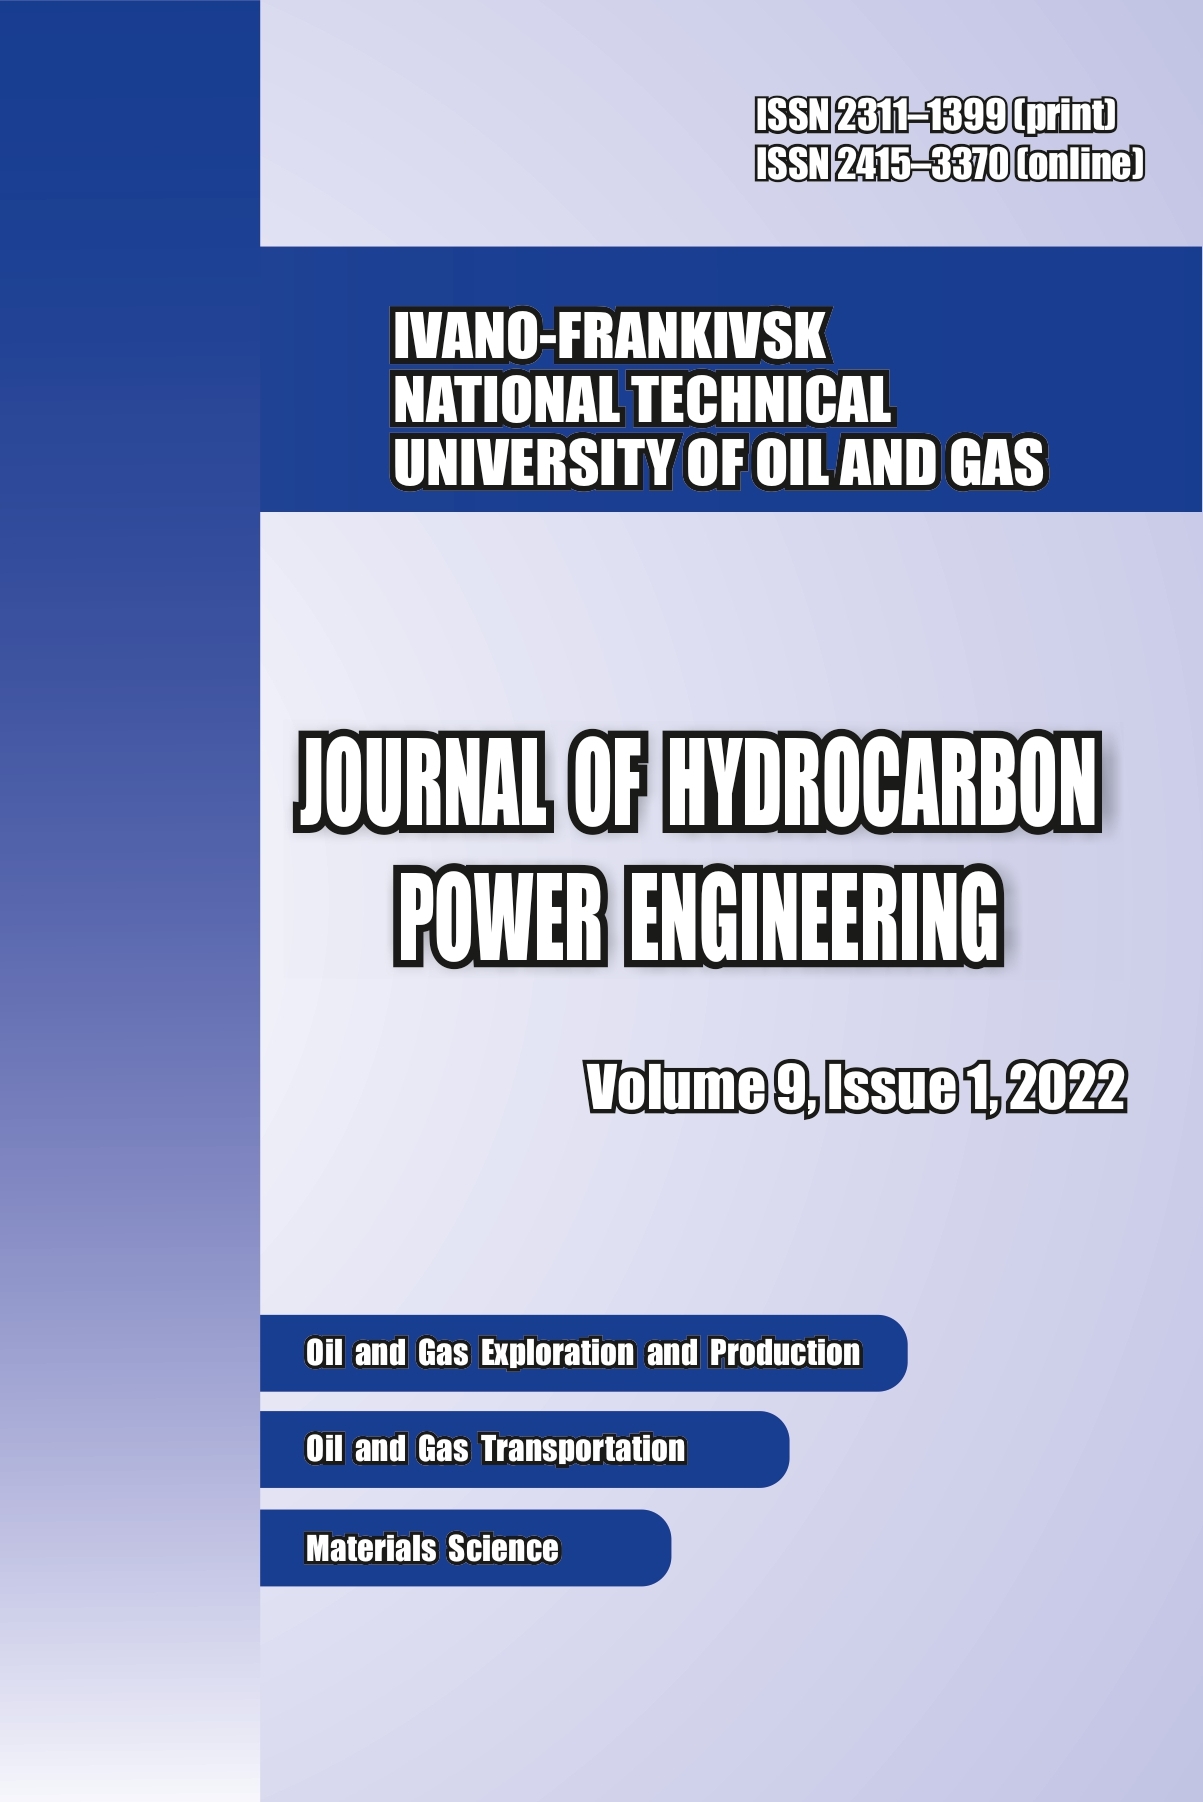 					View Vol. 9 No. 1 (2022): JOURNAL OF HYDROCARBON POWER ENGINEERING
				